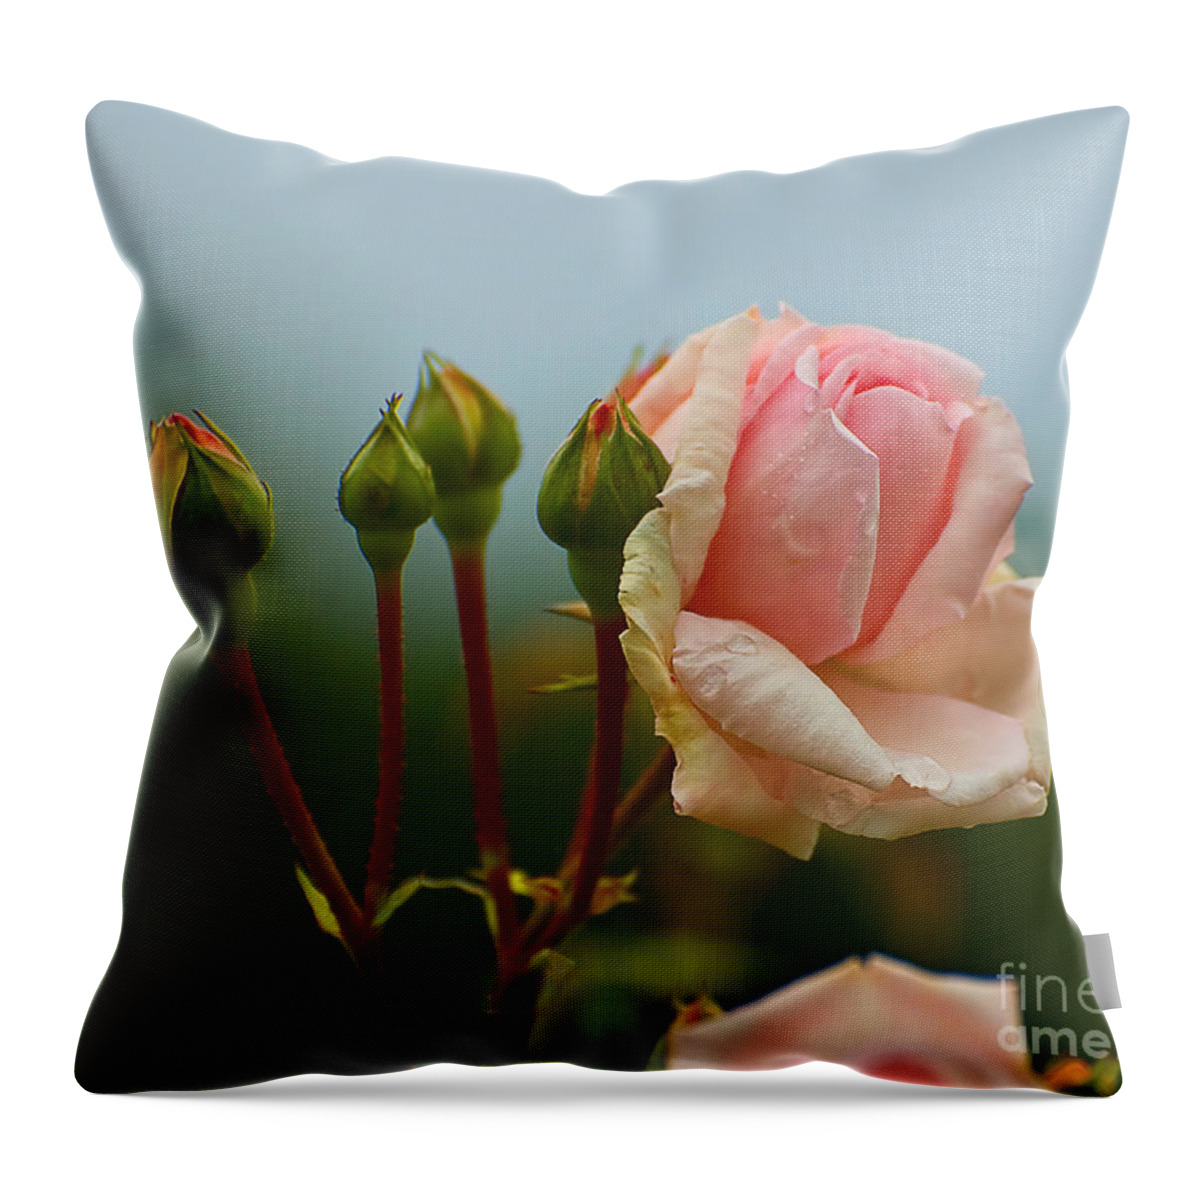 Rose Throw Pillow featuring the photograph Pink Rose 2 by Edward Sobuta